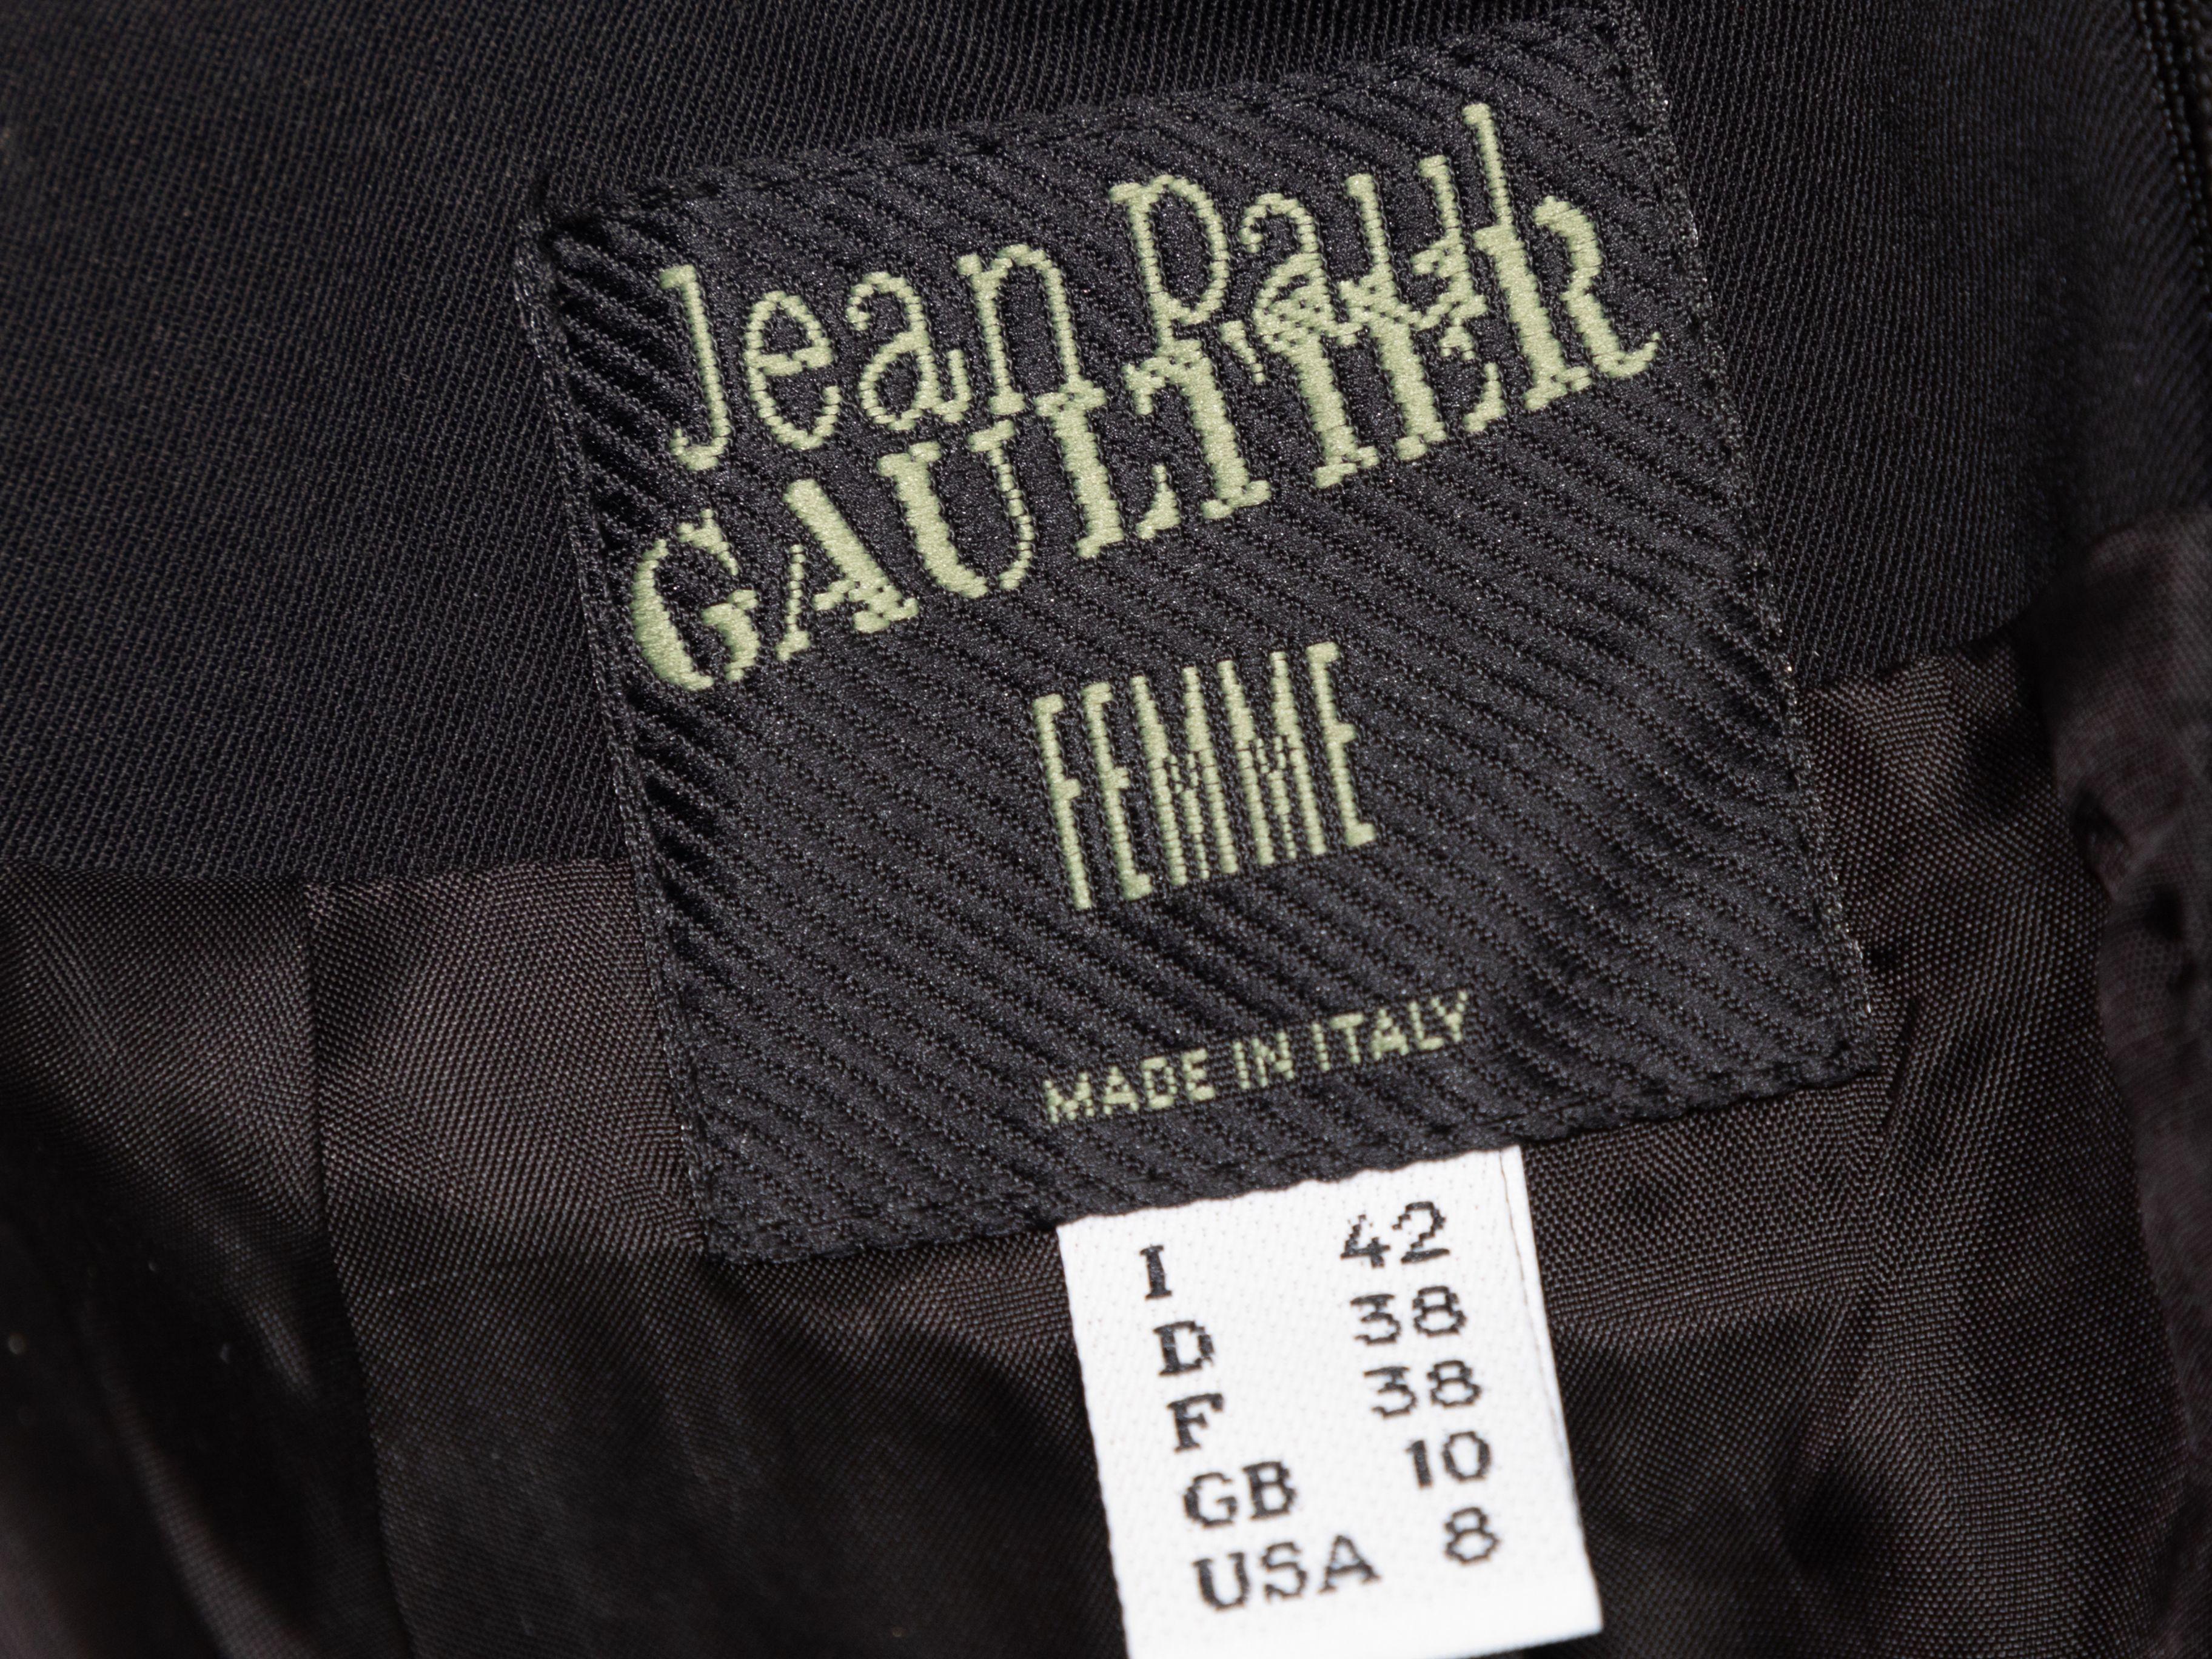 Product Details: Black wool knee-length skirt by Jean Paul Gaultier Femme. Gold-tone buckle strap accent at back. Zip closure at center back. 28